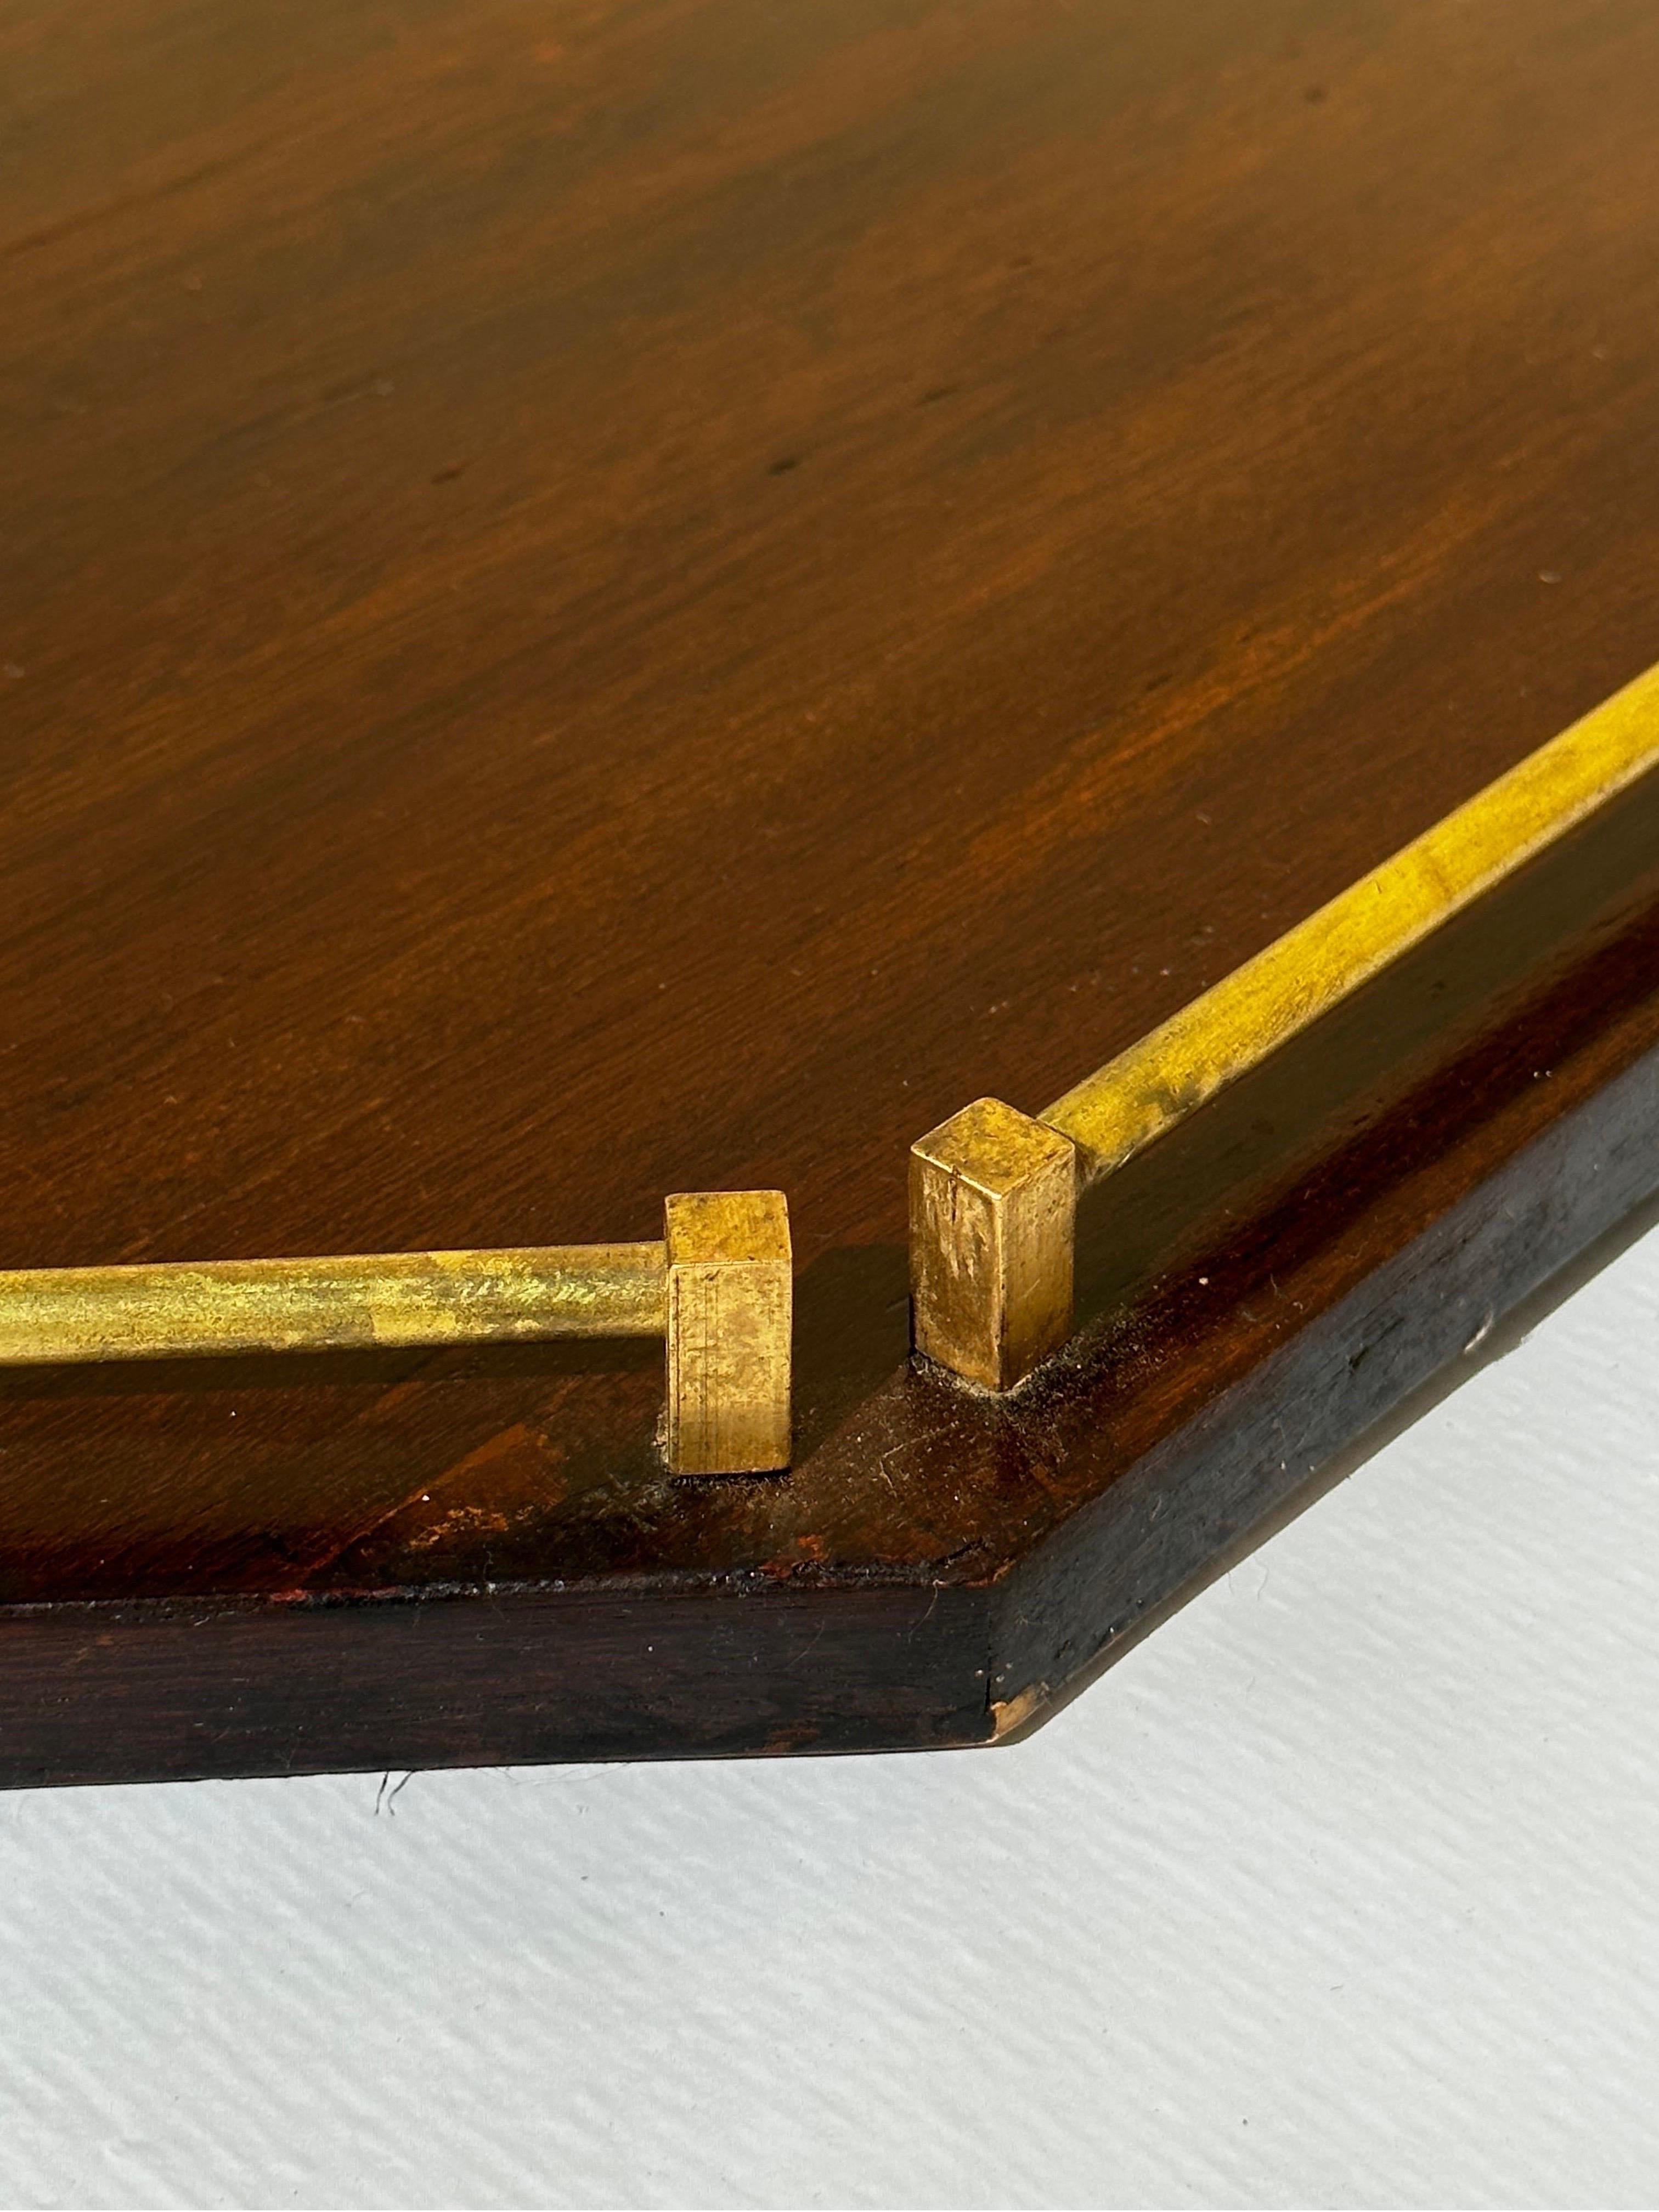 Brazilian Midcentury Jacarandá Rosewood and Brass Serving Tray, 1960s For Sale 3